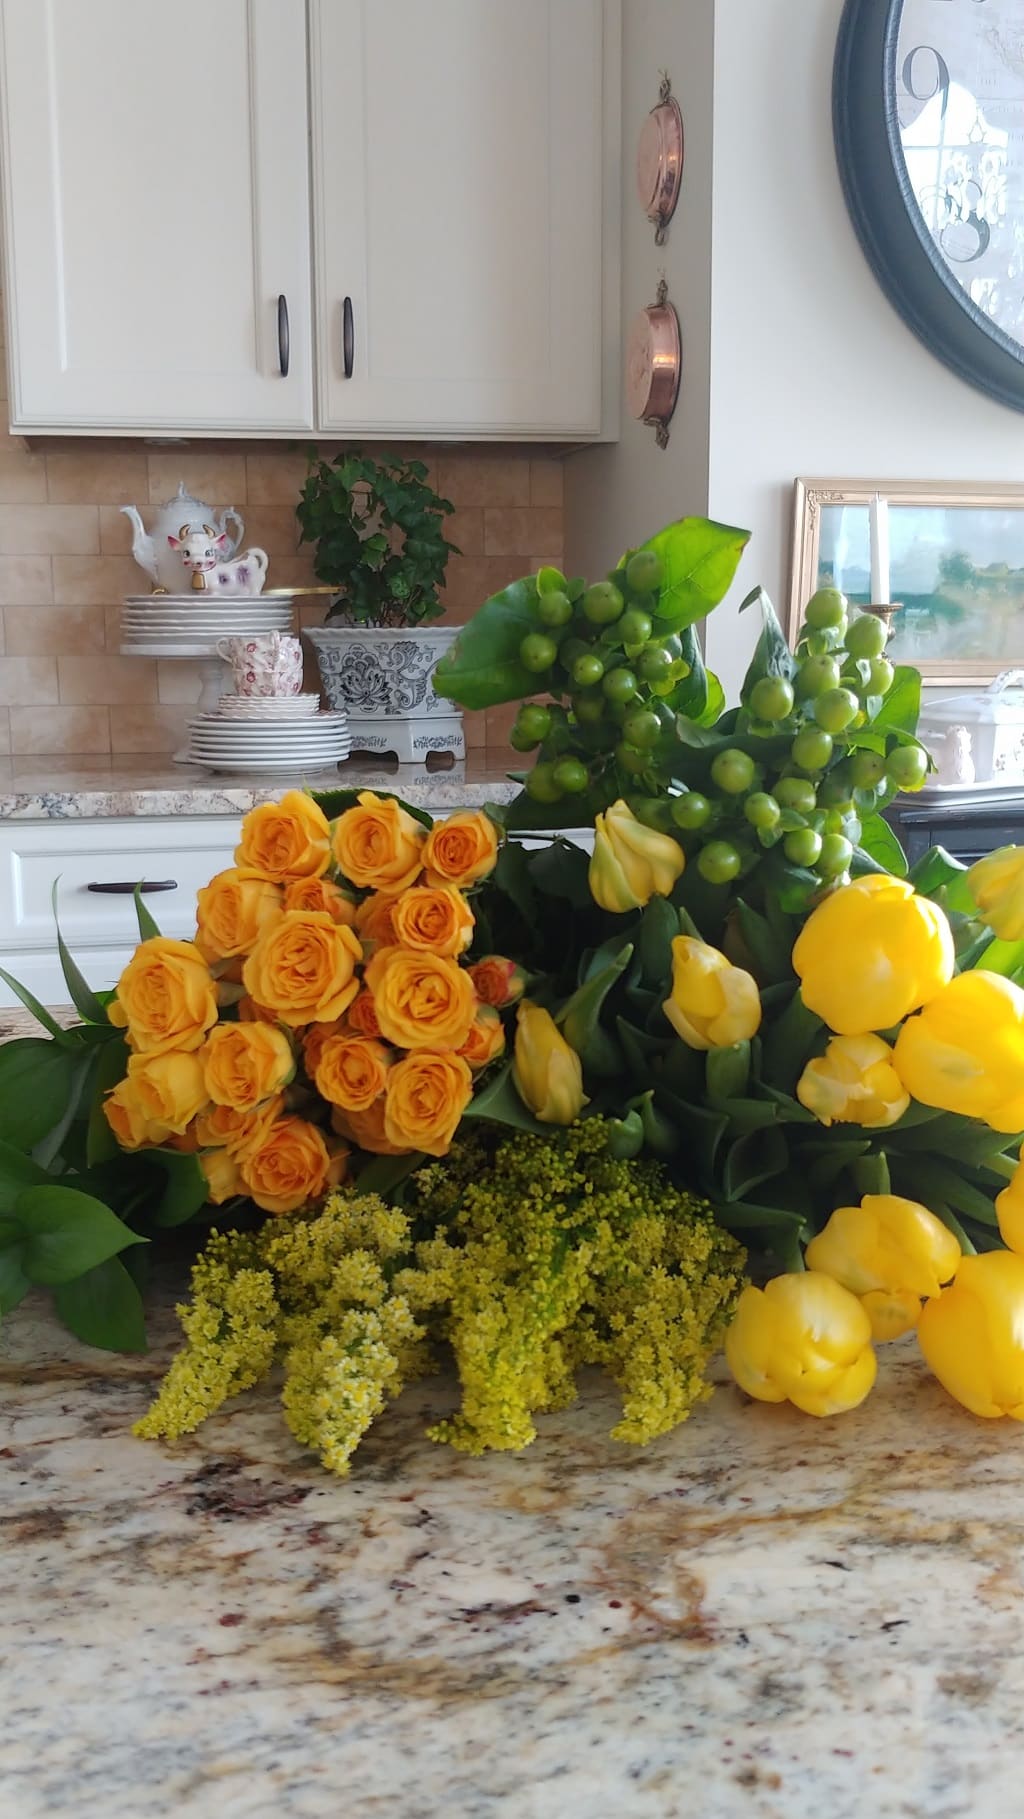 How to Make a Beautiful Spring Floral Arrangement